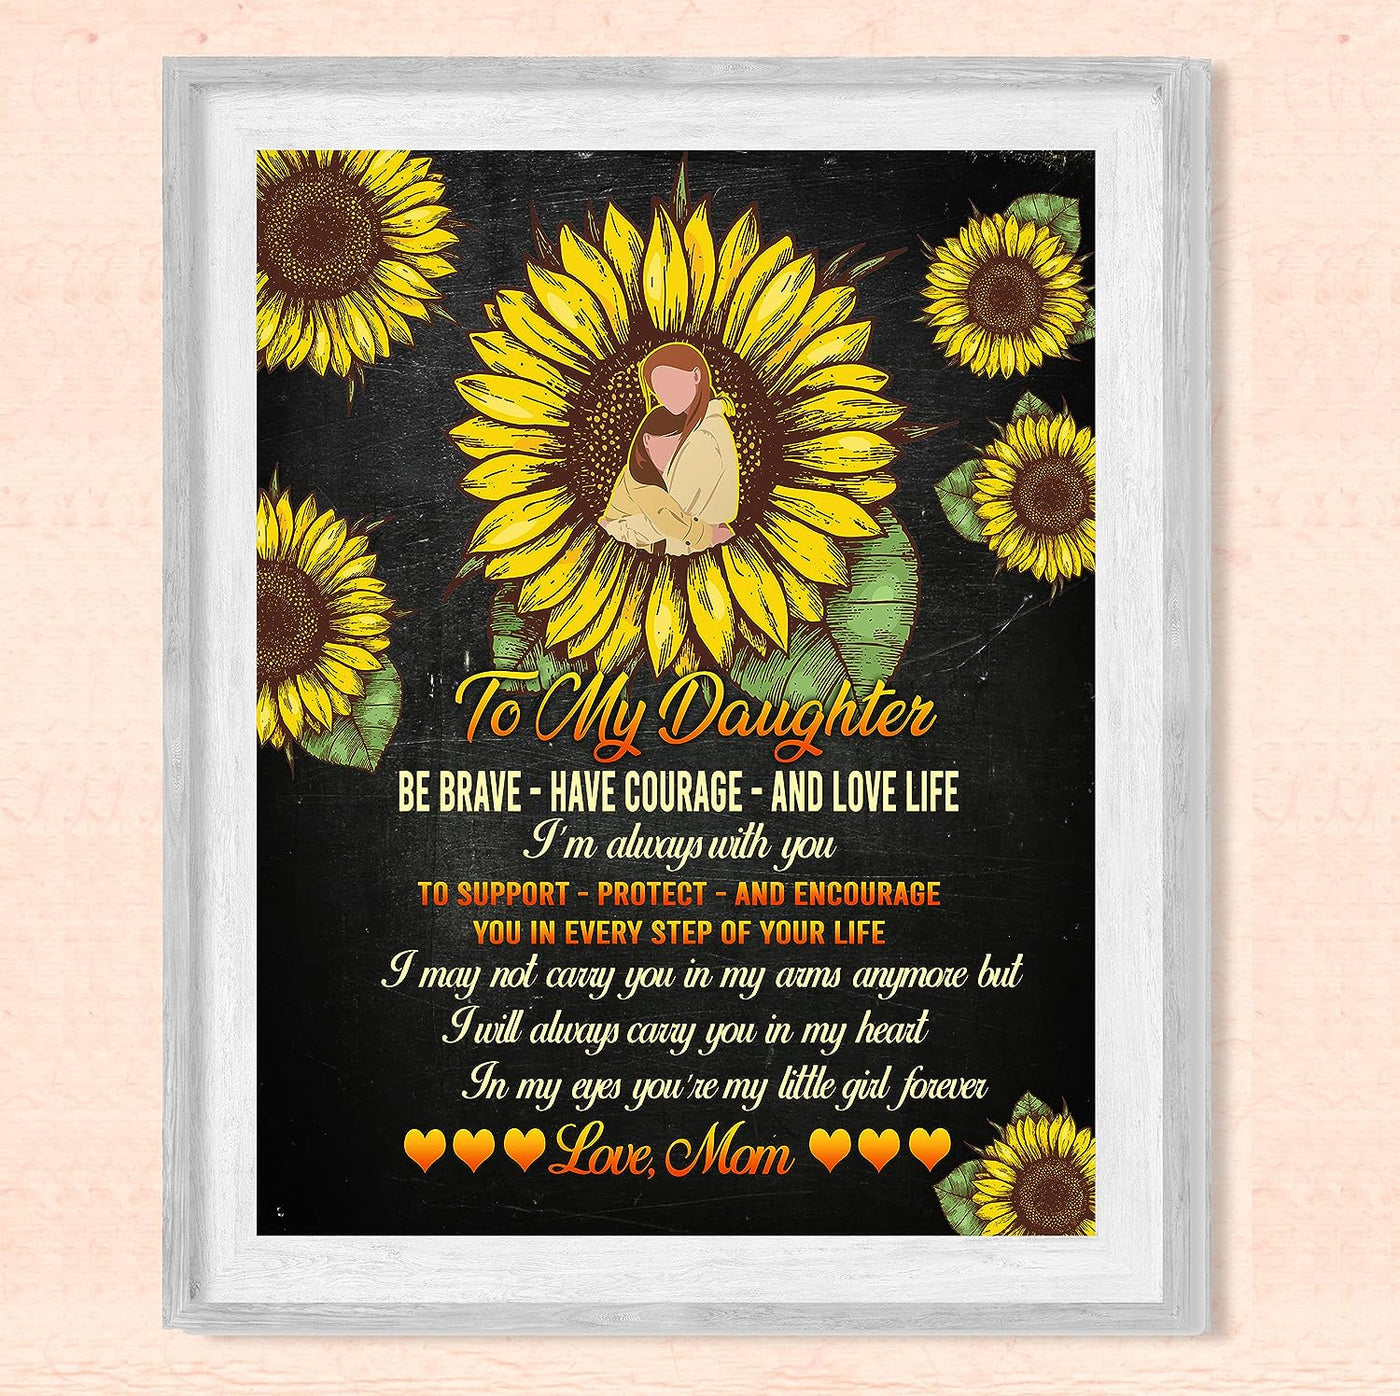 To My Daughter -Be Brave, Love Life Inspirational Family Wall Art -8 x 10" Country Rustic Sunflower Print -Ready to Frame. Loving, Keepsake Gift for All Daughters! Perfect for Graduation-Wedding!